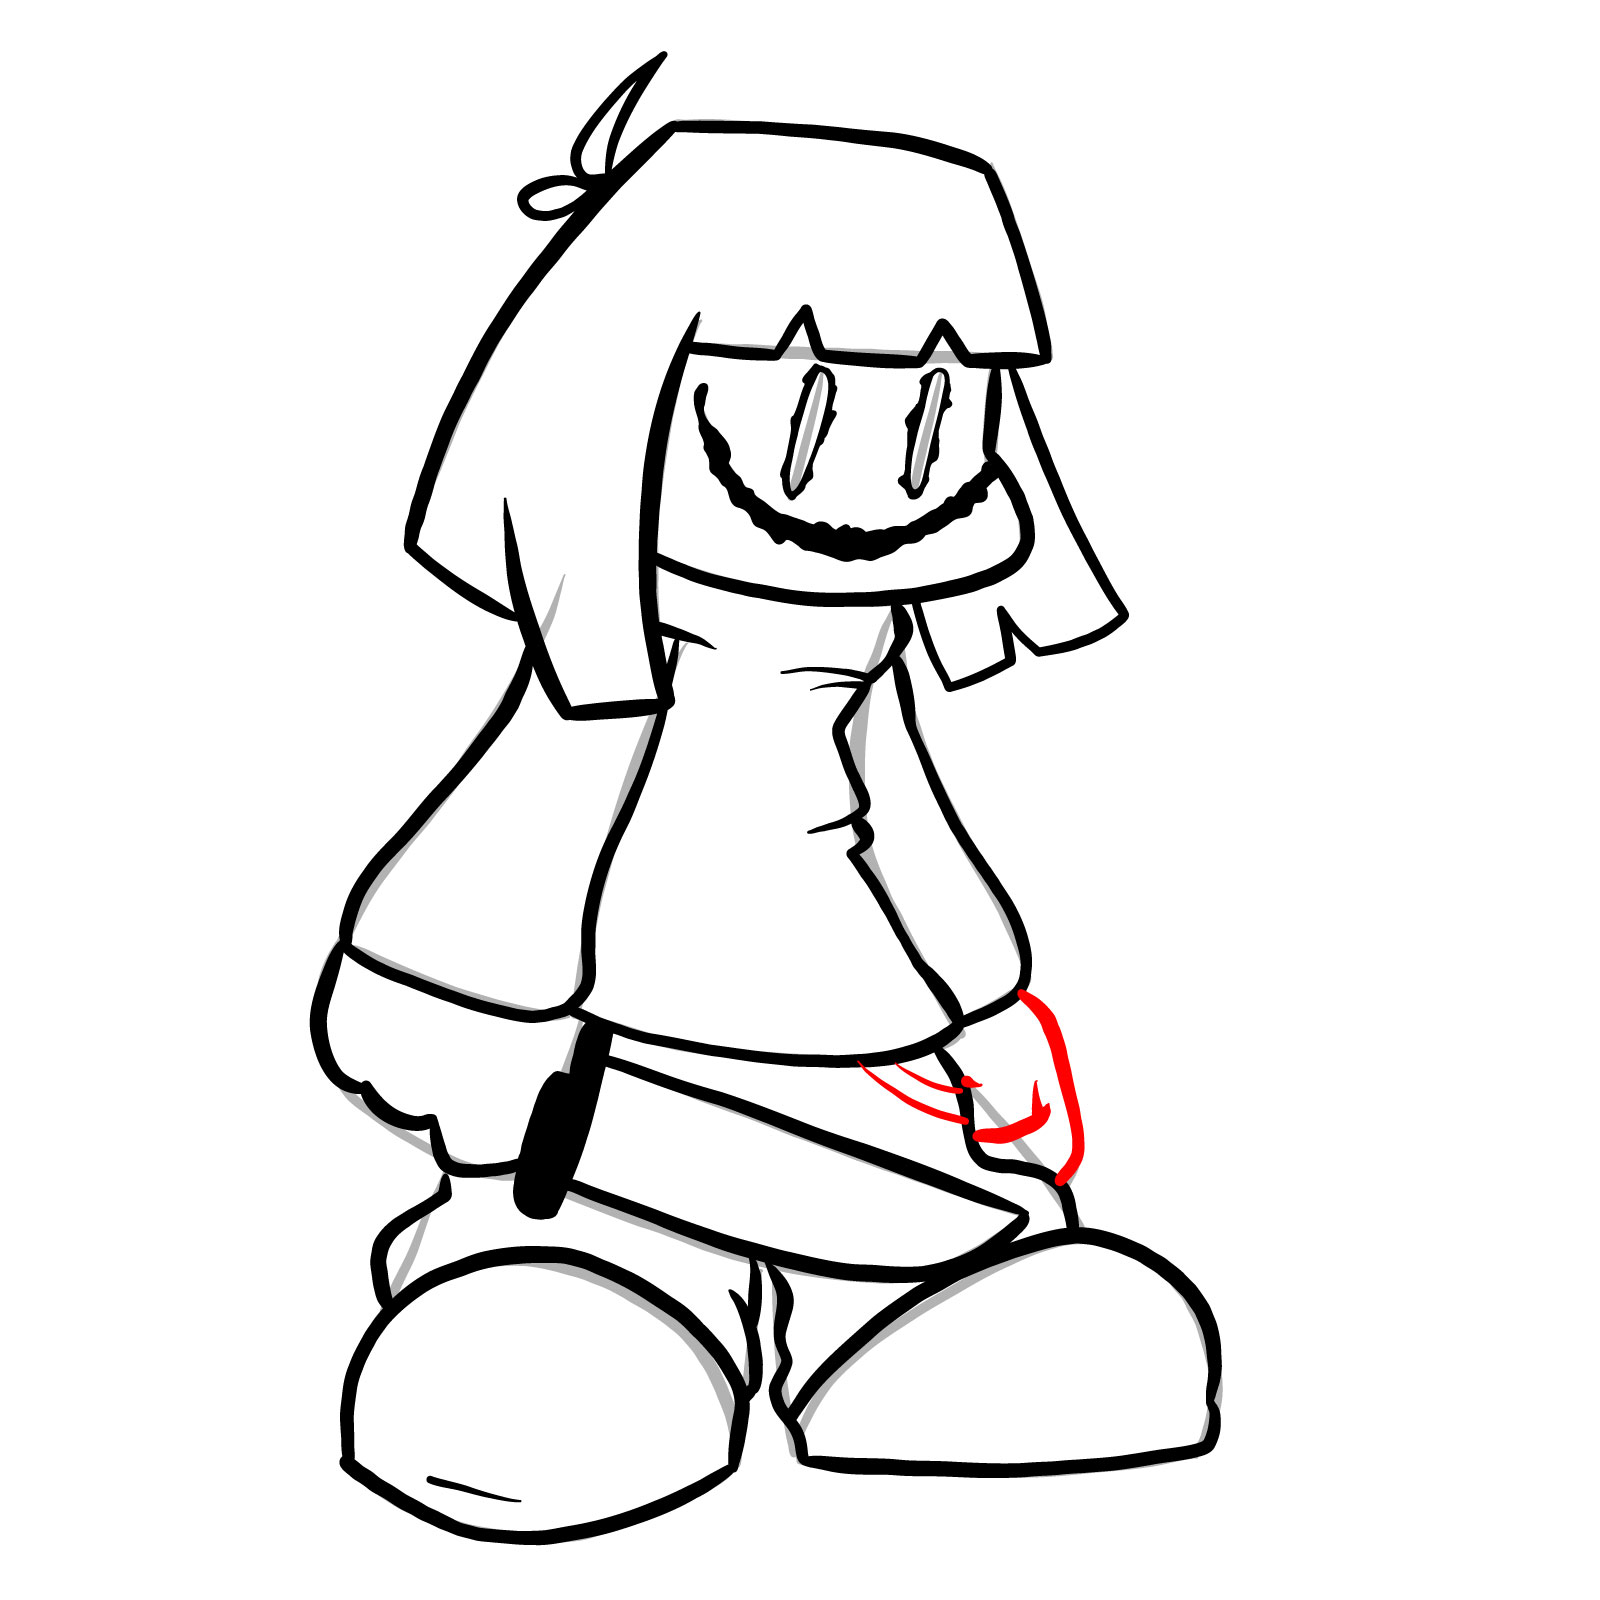 How to draw Chara from Friday Night Dustin' - step 21